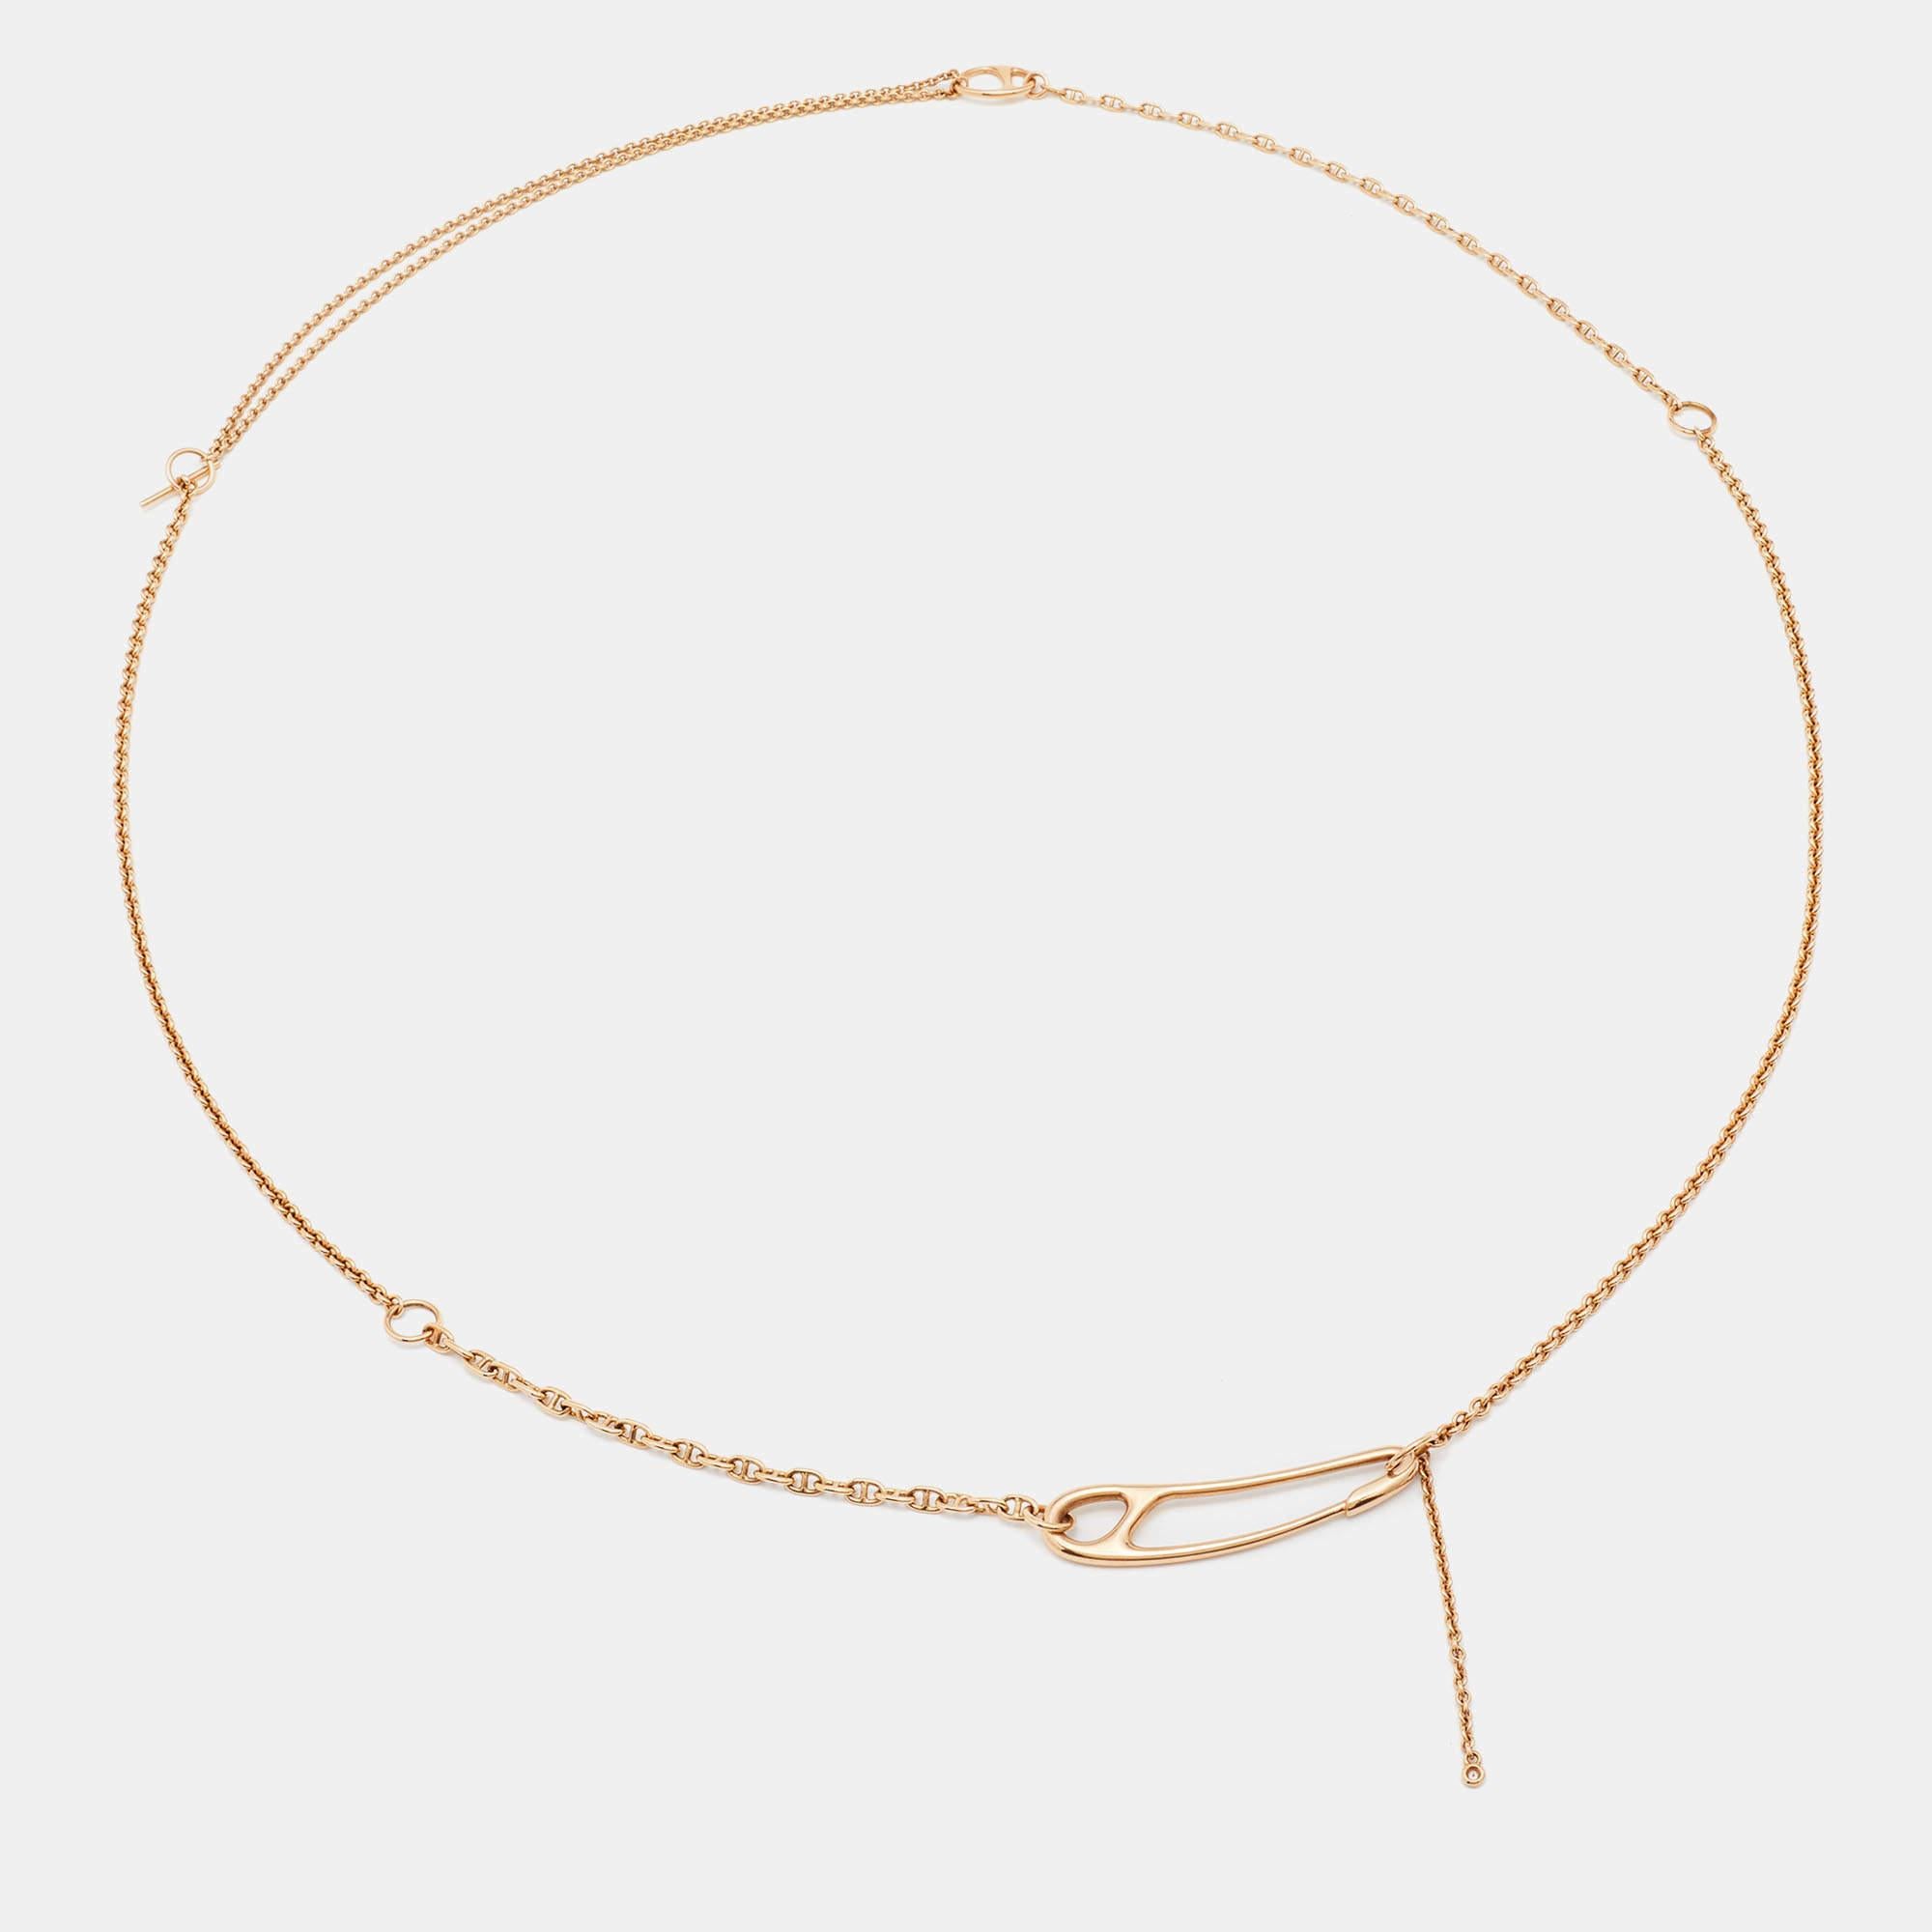 This necklace from Hermès imparts elegance through its distinctive design and is crafted using 18k rose gold. It speaks of impeccable style and ultimate luxury with the discernible motifs on the chain. Flaunt your chic fashion taste by buying this